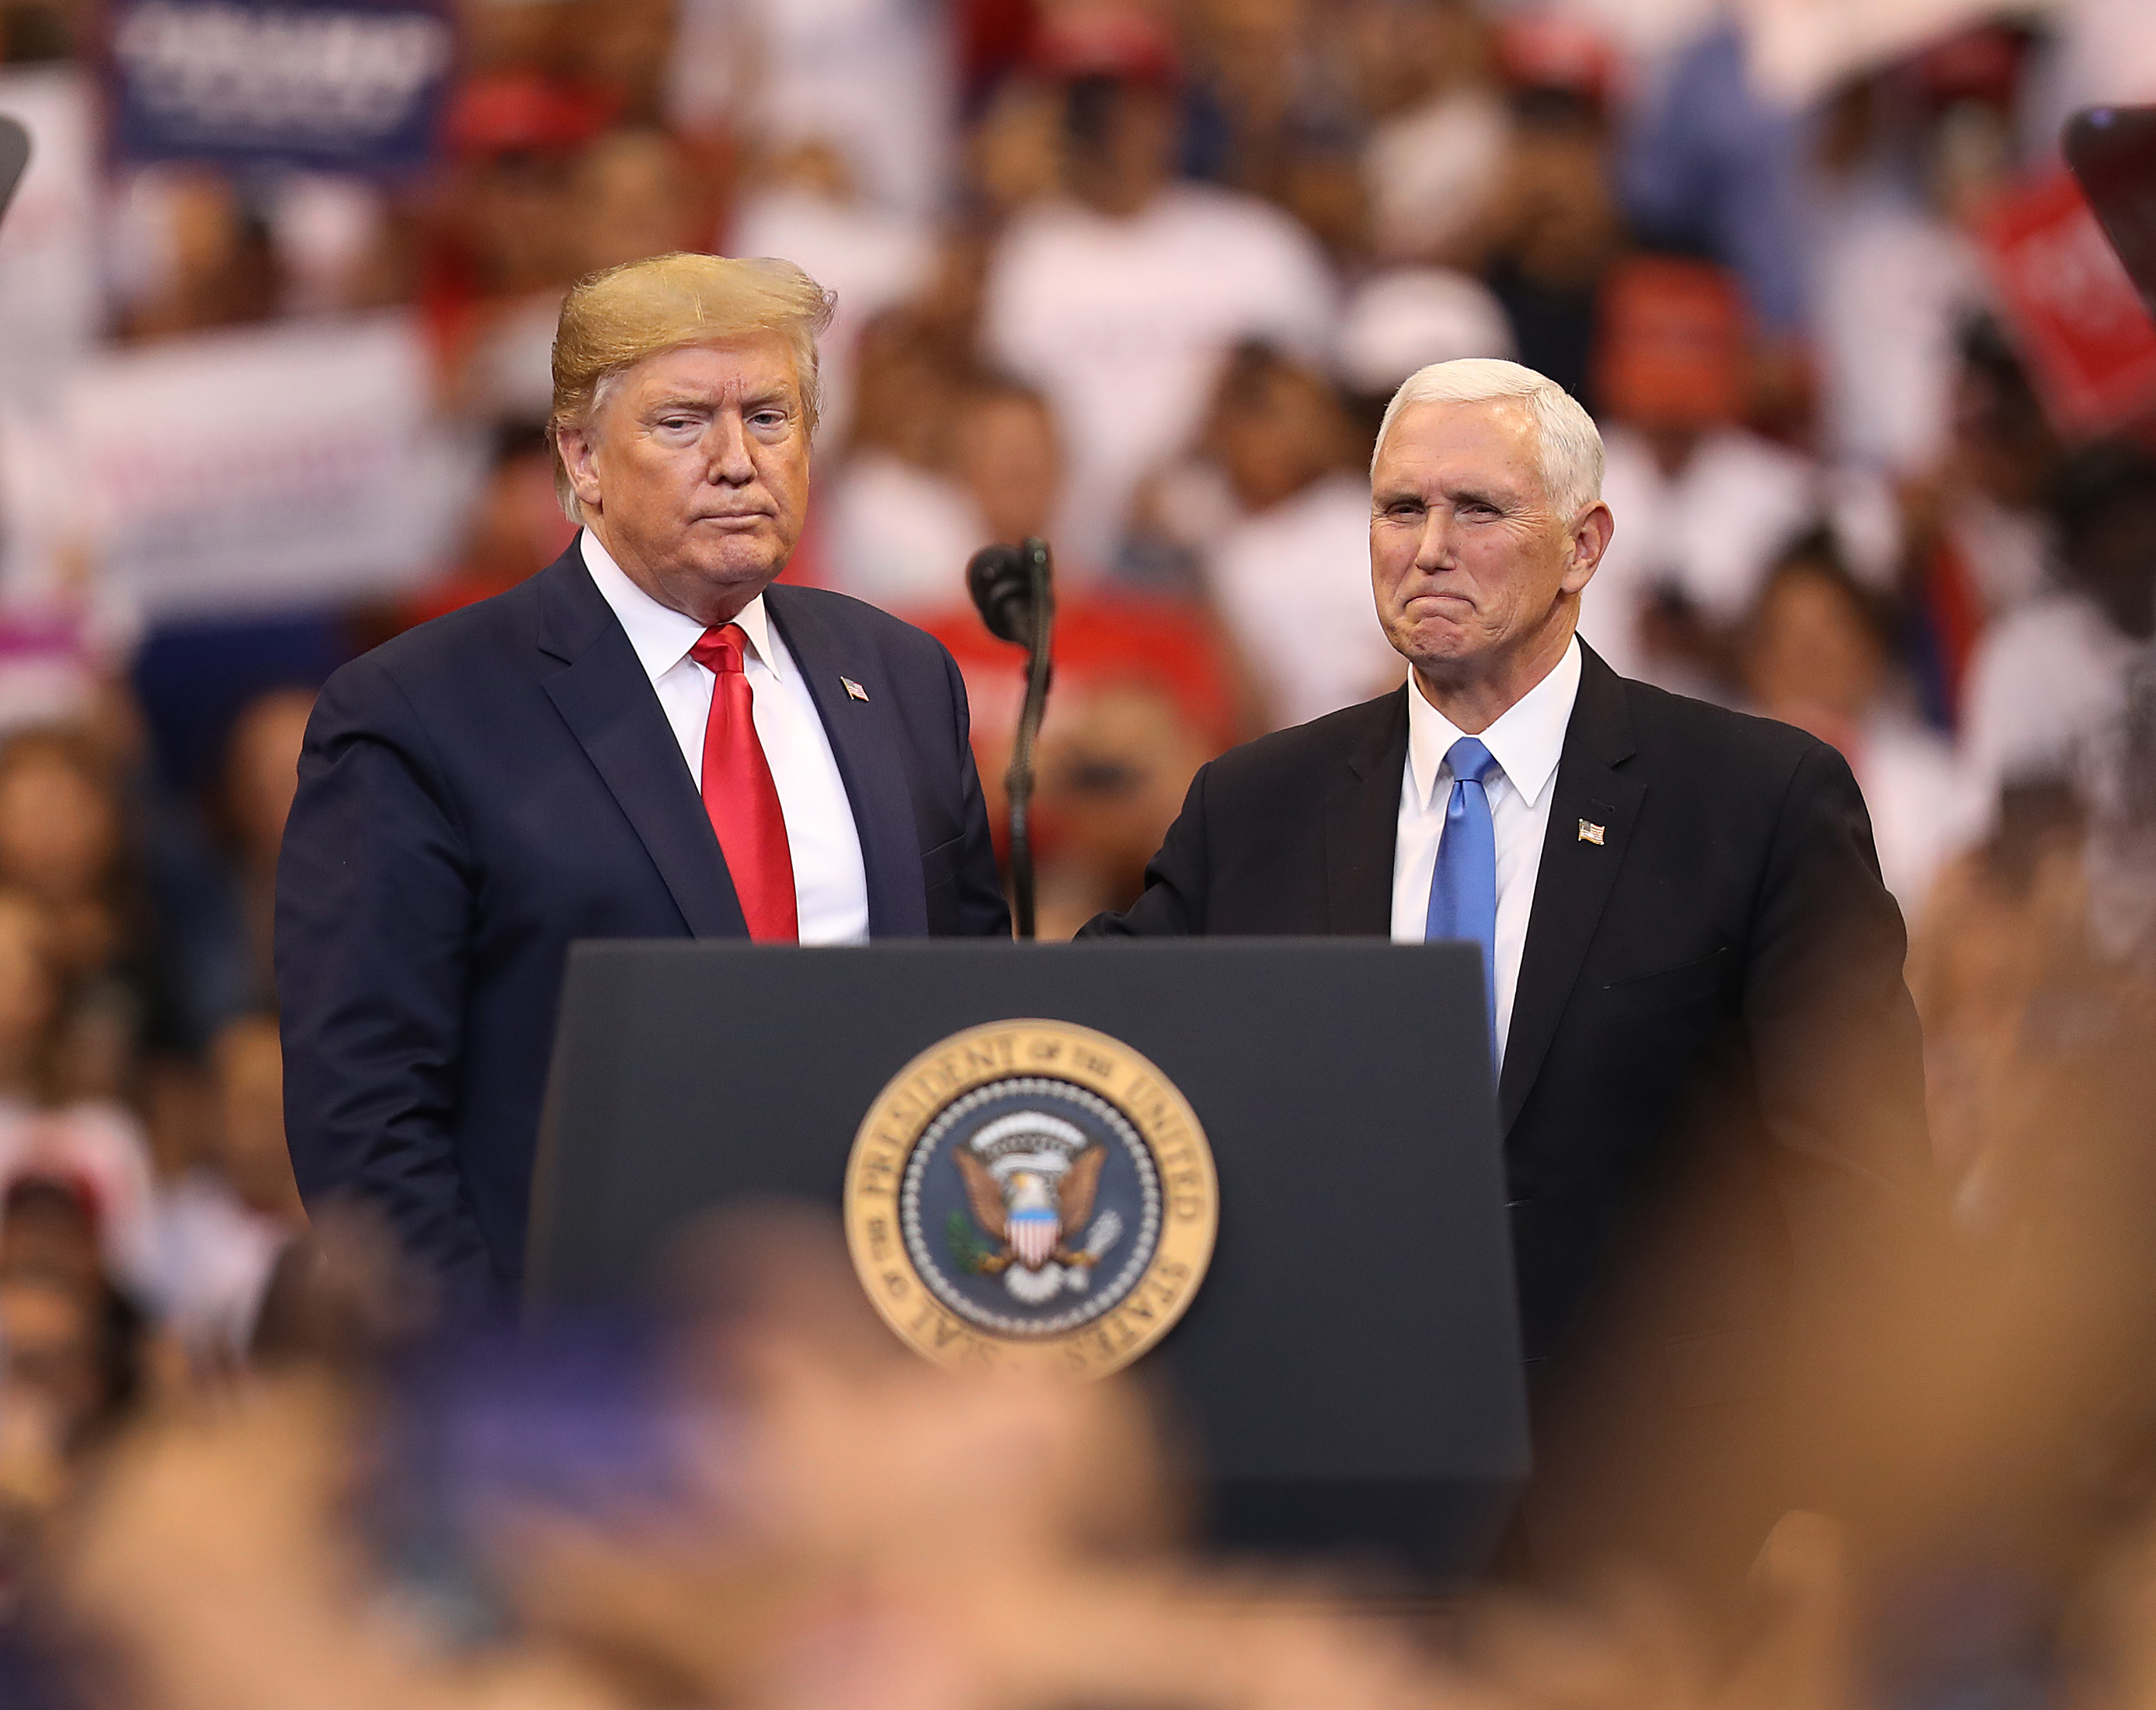 Could Mike Pence Beat Donald Trump in 2024? What Polls Show